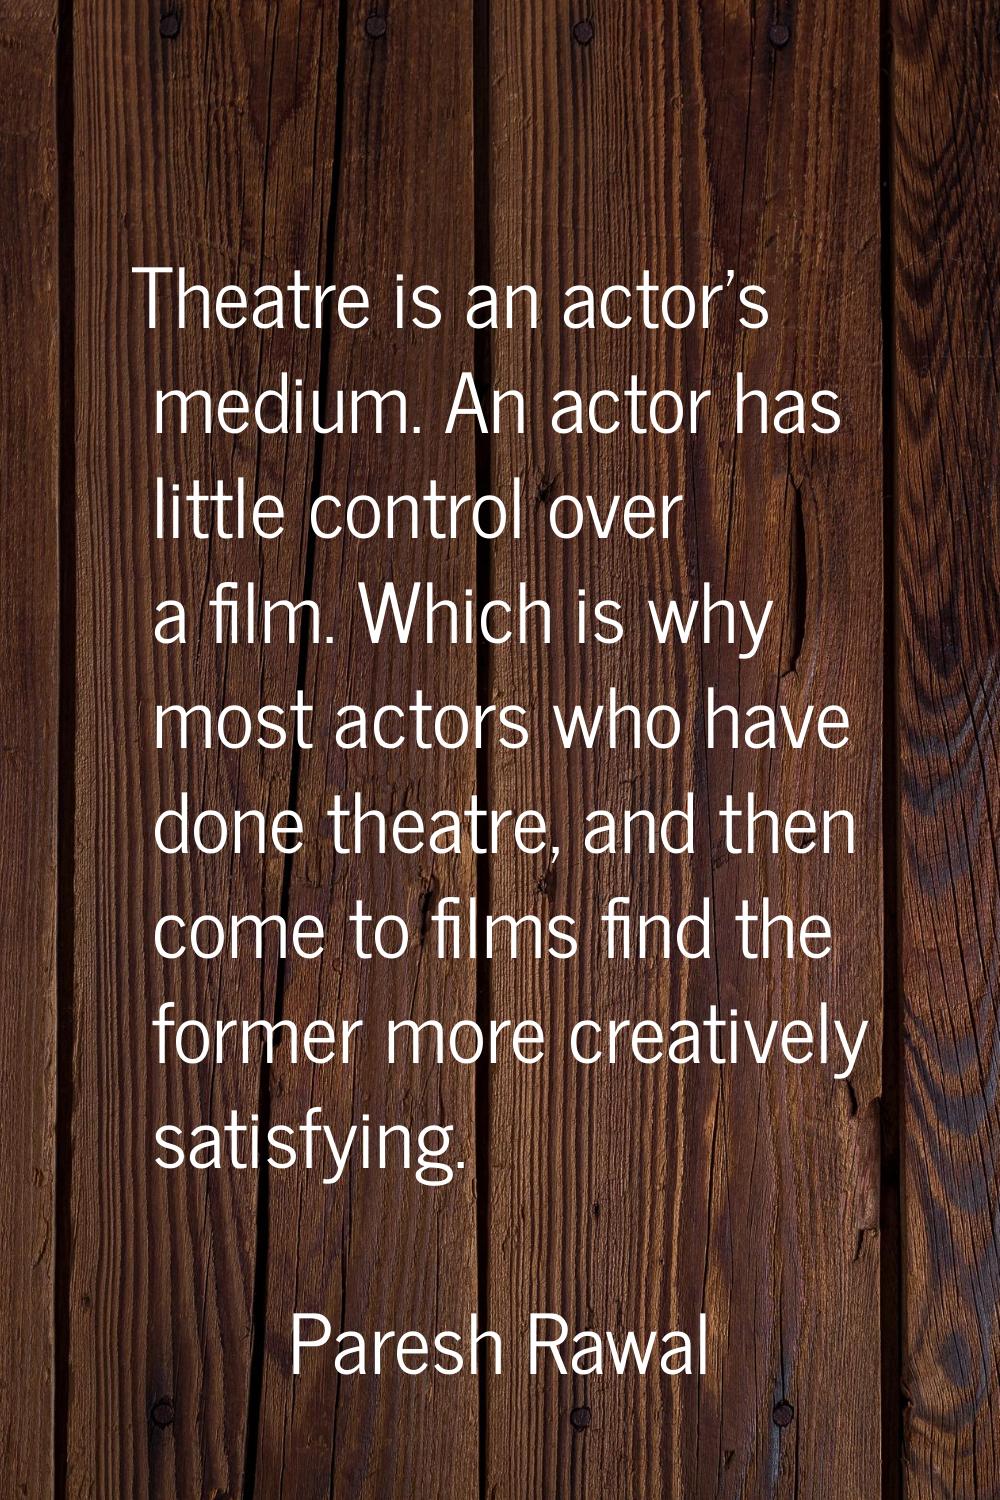 Theatre is an actor's medium. An actor has little control over a film. Which is why most actors who